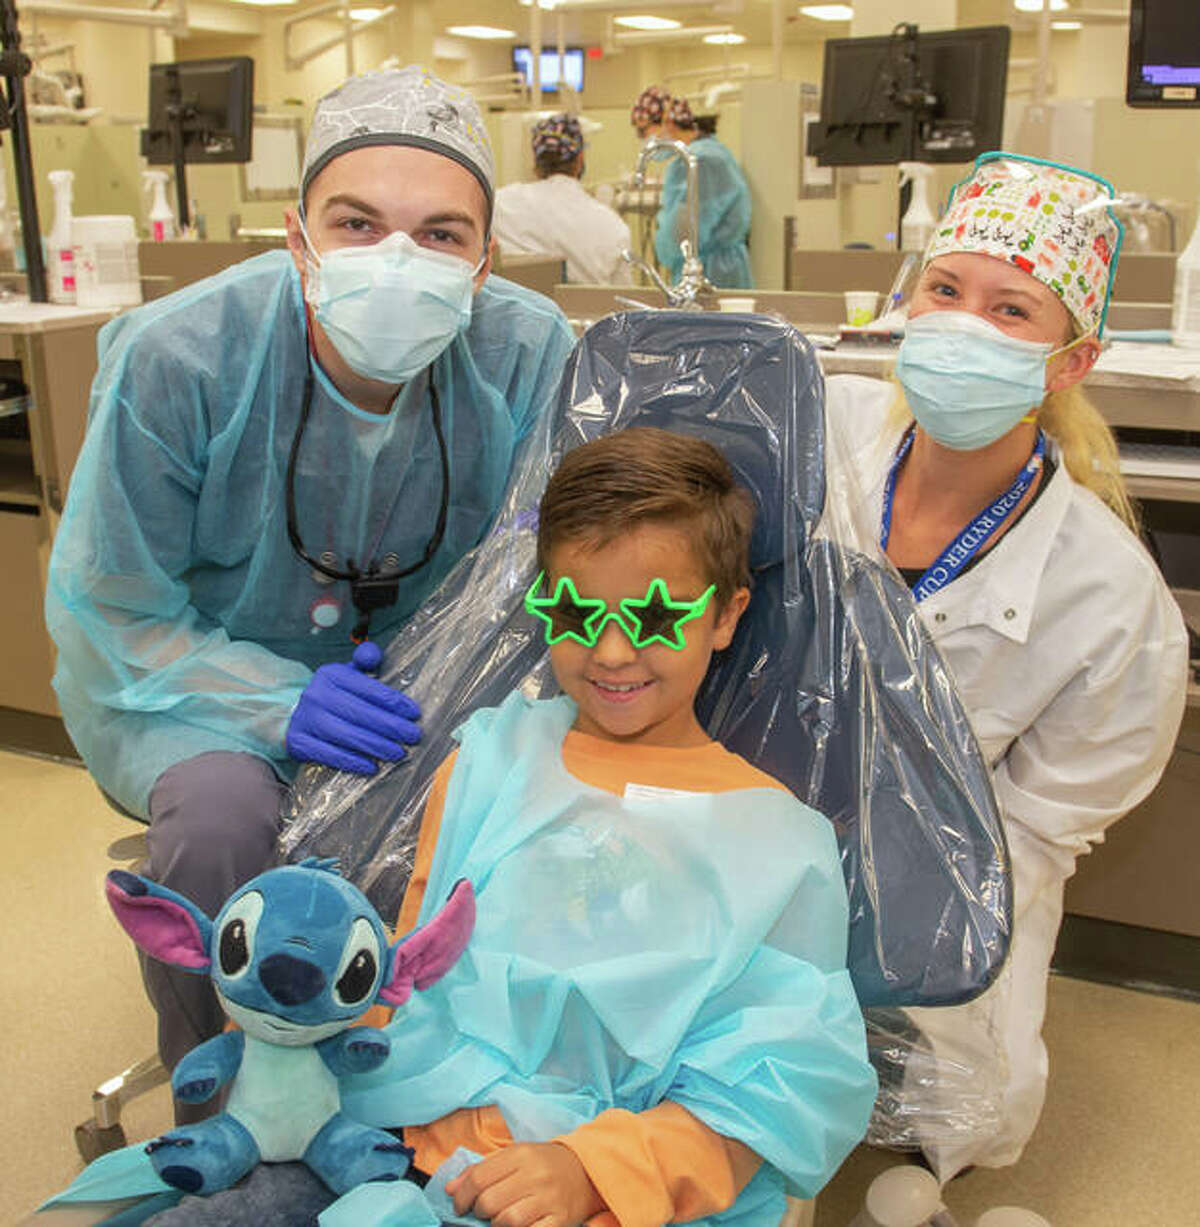 A child receives dental care during the SIU SDM’s Give Kids a Smile Day event on Oct. 11. A record number of 126 children received treatments valued at more than $61,000 on Monday.